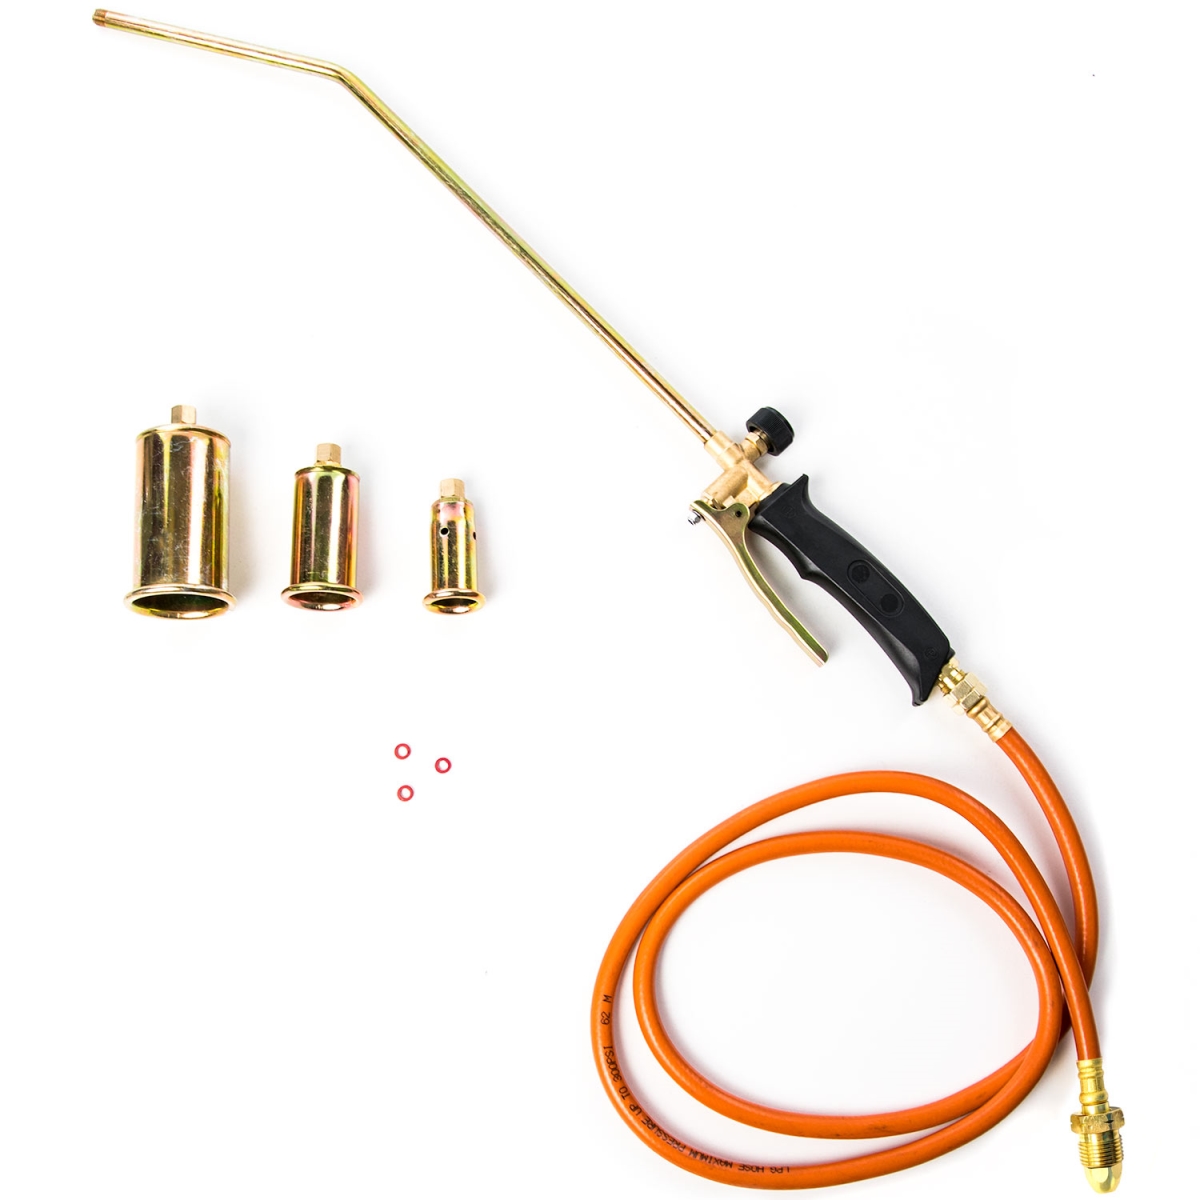 Burn-666 24 In. Portable Propane Torch Kit With 3x Nozzles